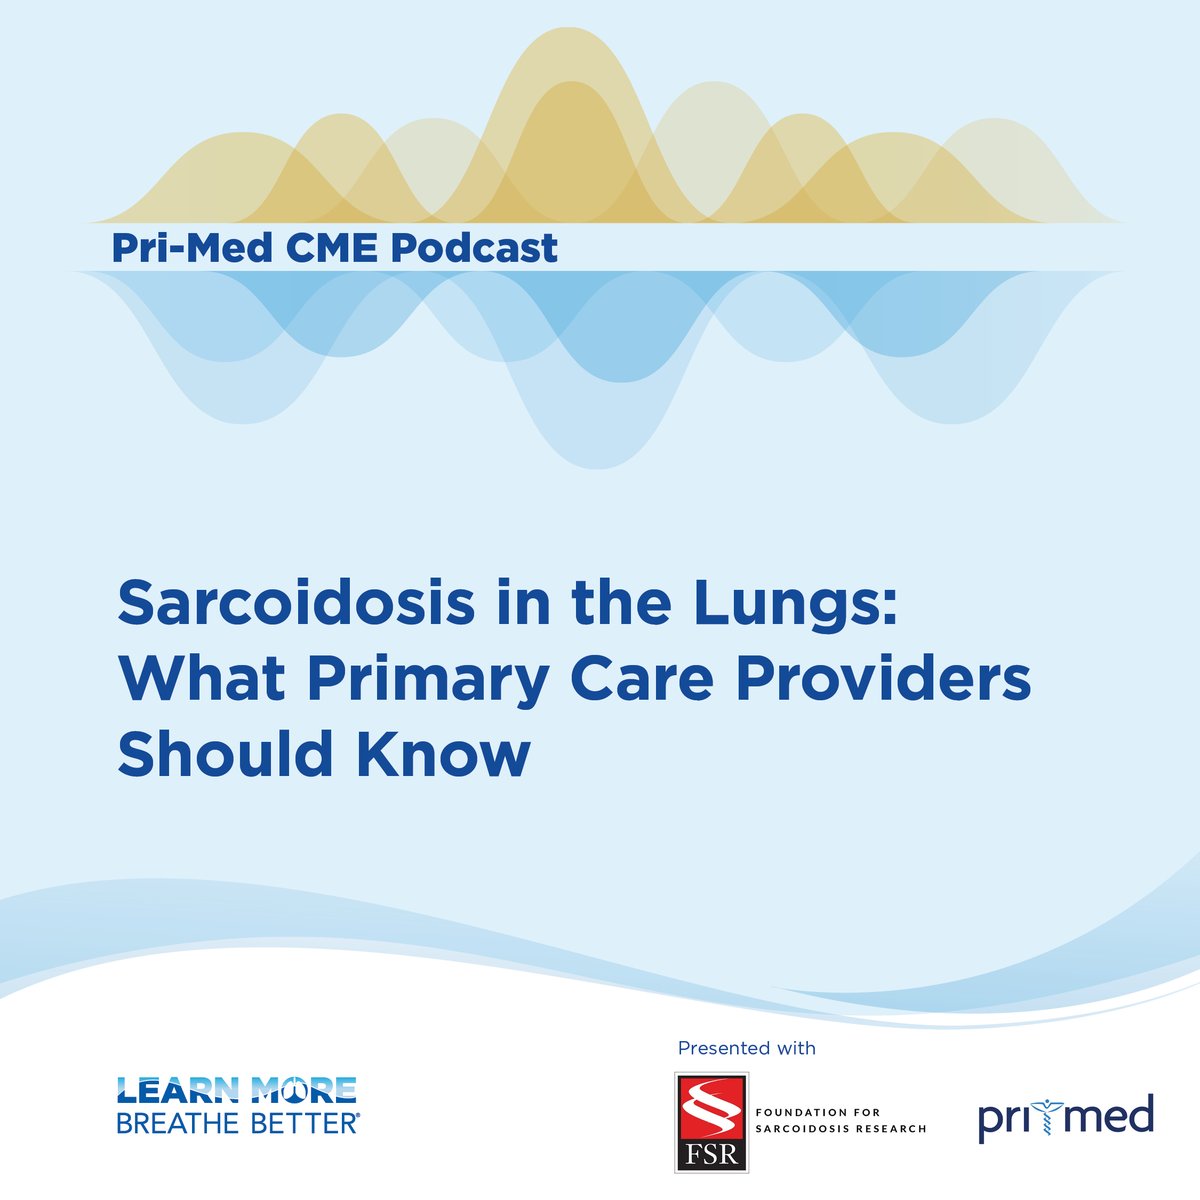 Primary care providers: Earn CME credit through this @PriMedCME podcast presented with @StopSarcoidosis on what to know about sarcoidosis in the lungs. Speakers include @NHLBI_Translate & @YaleMed's Dr. Mridu Gulati. Listen here: bit.ly/45MSgHu